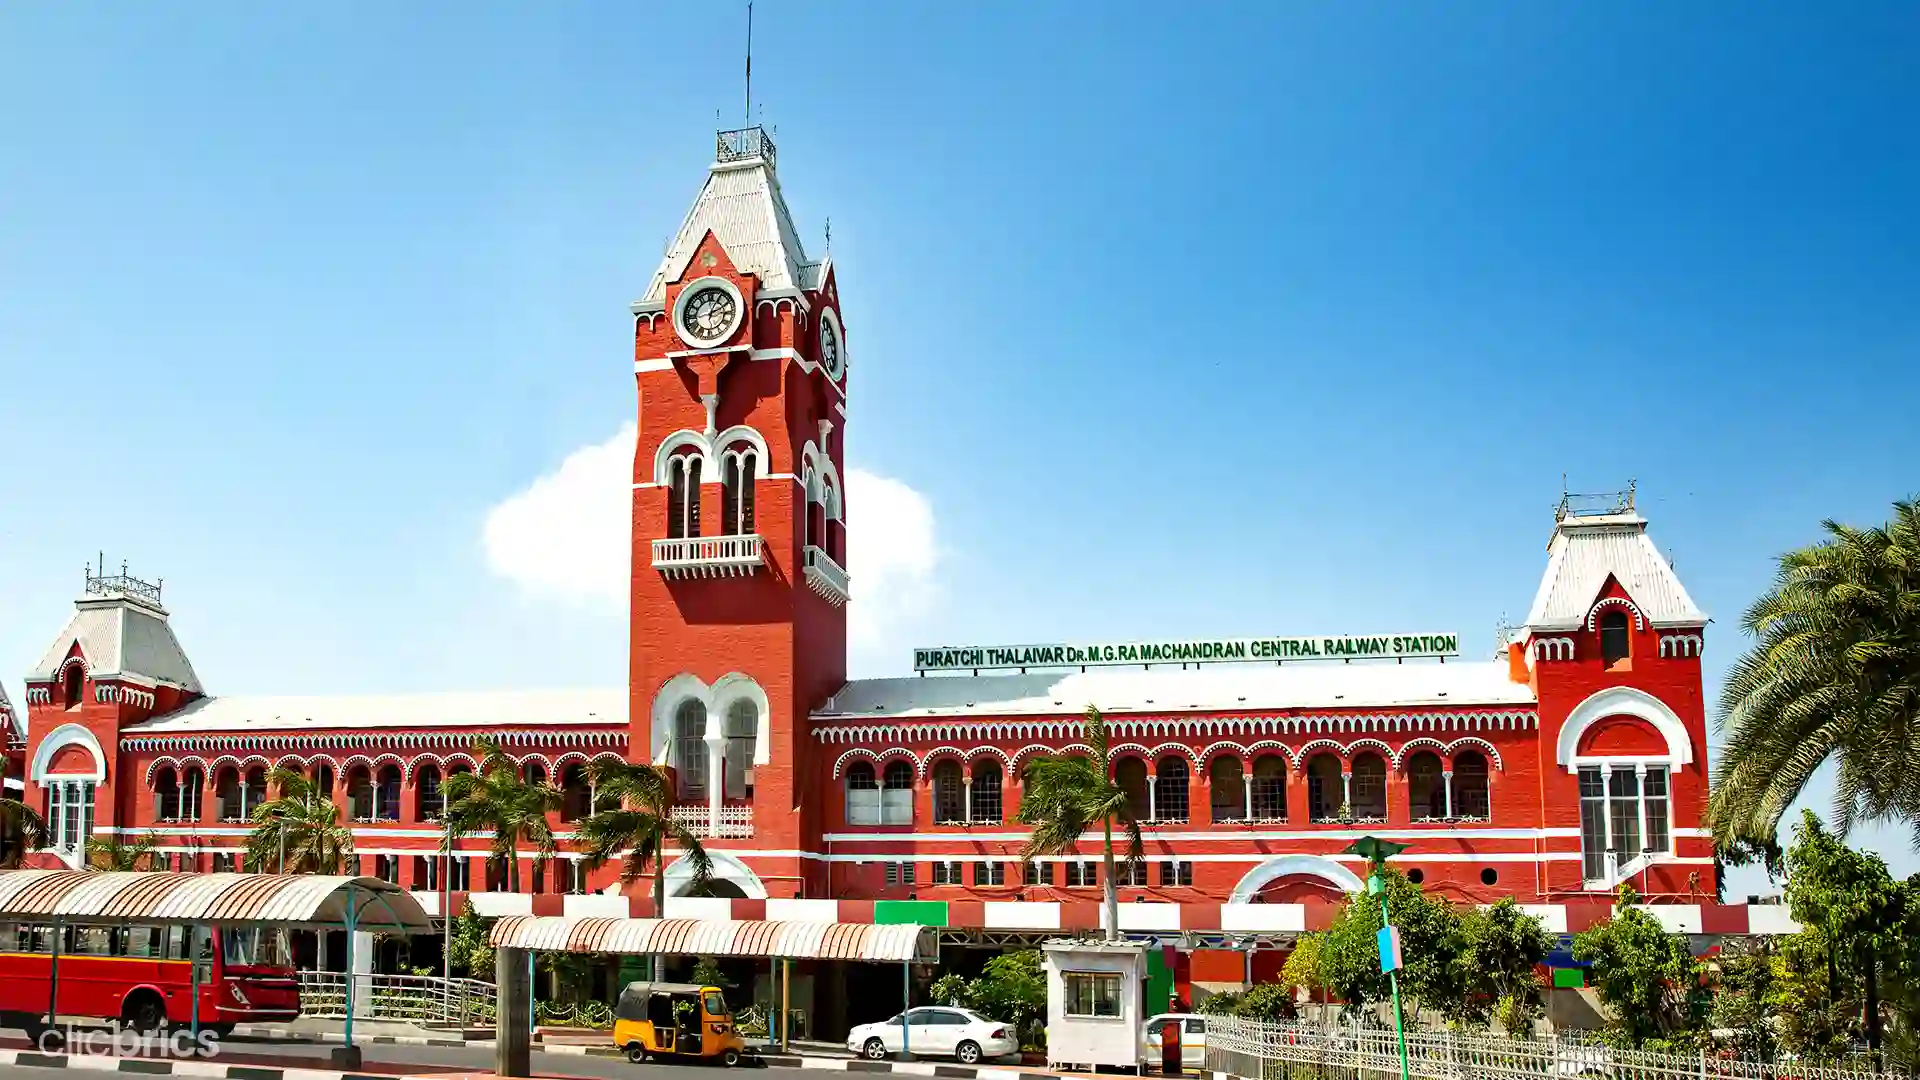 Top 10 Biggest Railway Stations in India